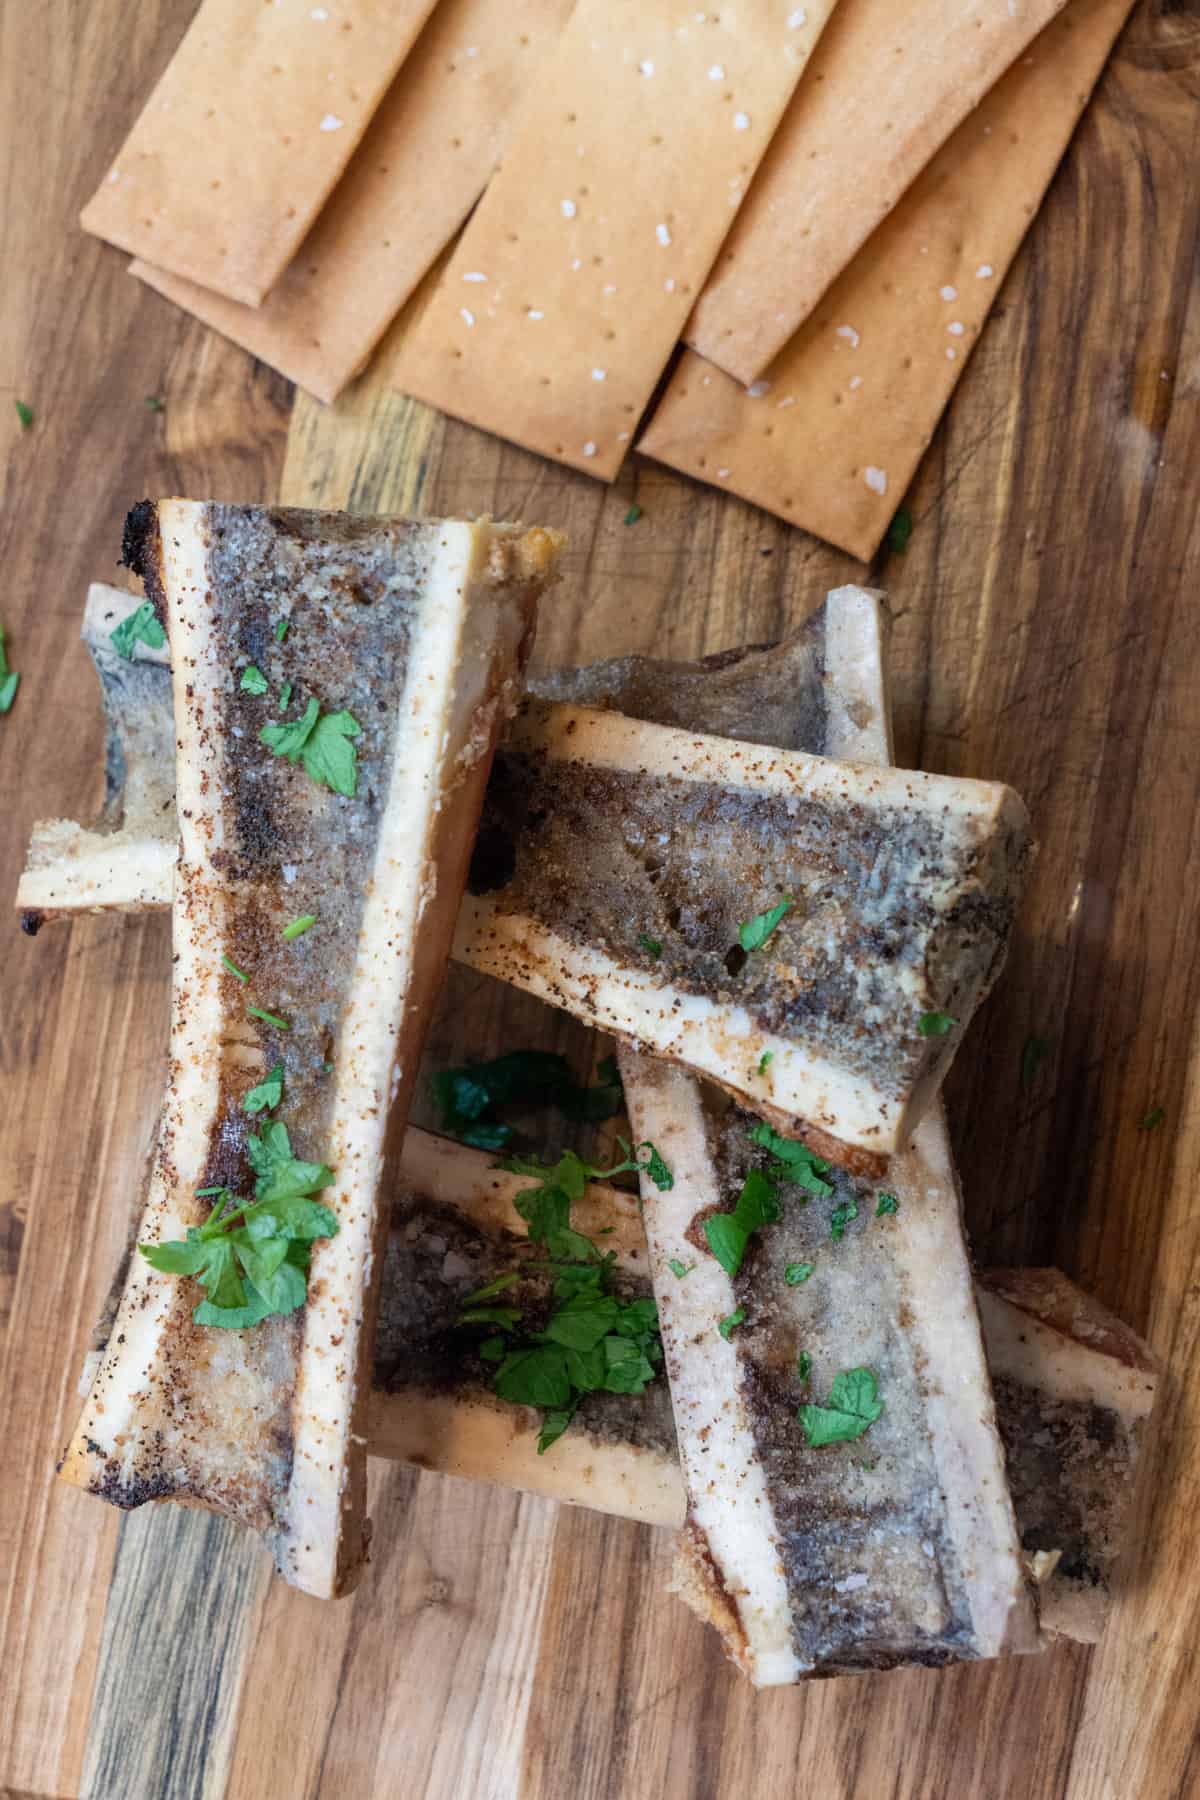 This Air Fryer Bone Marrow is made with bone marrow, salt, pepper, parsley and air fried to perfection.